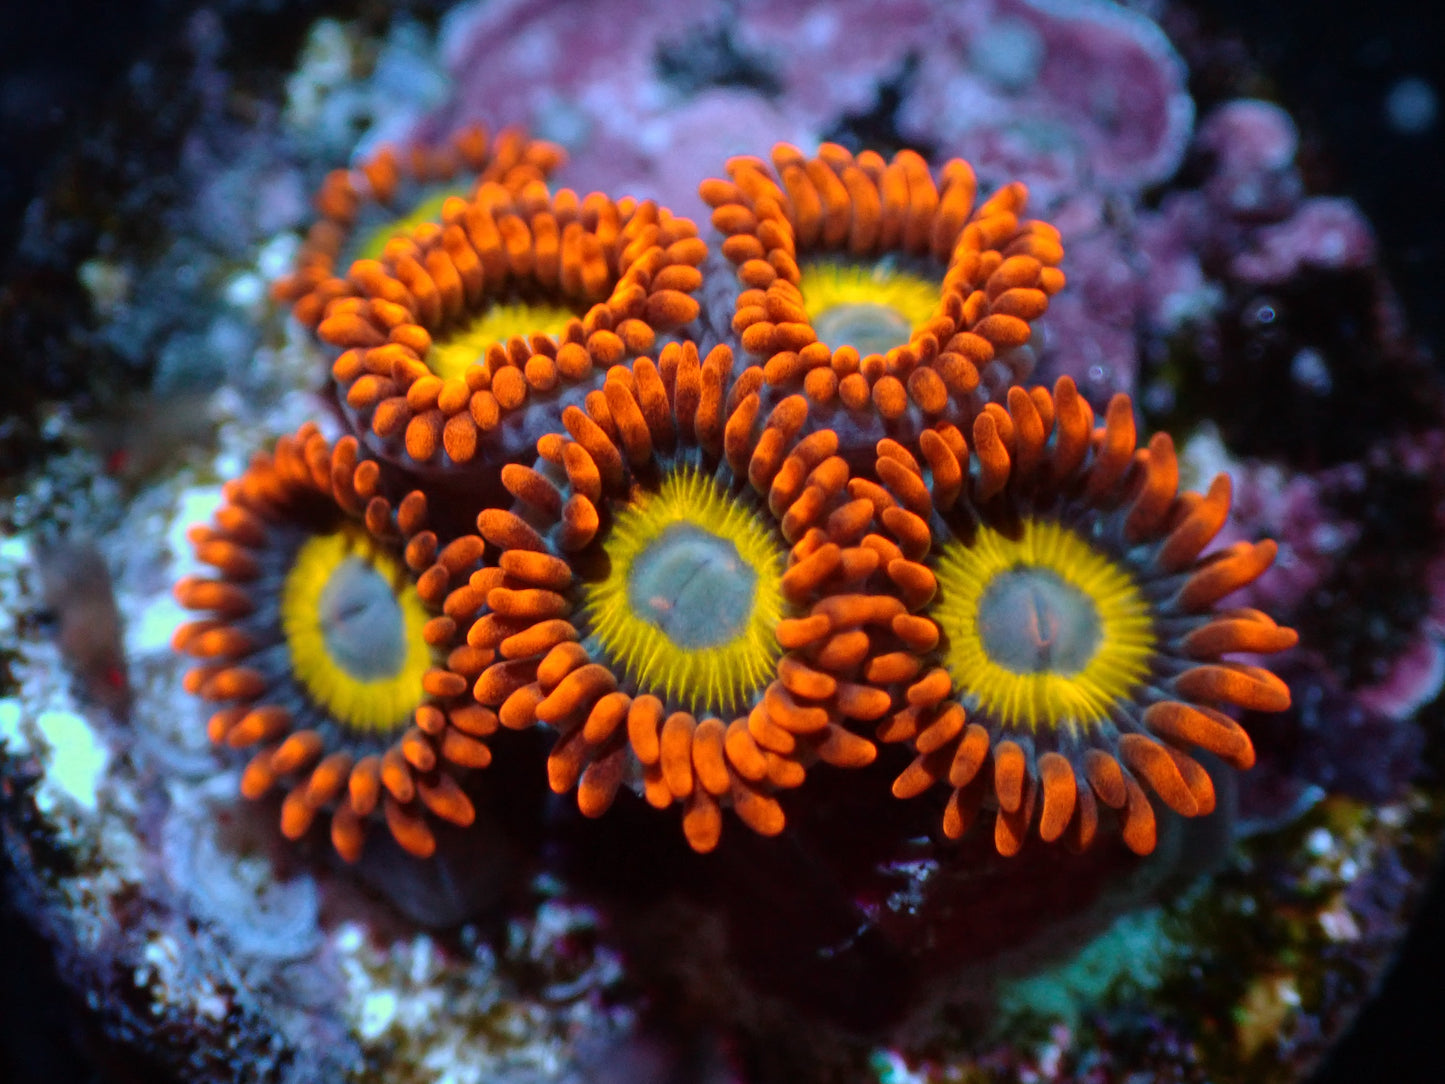 Blondie Zoas Auctions 4/17 ended